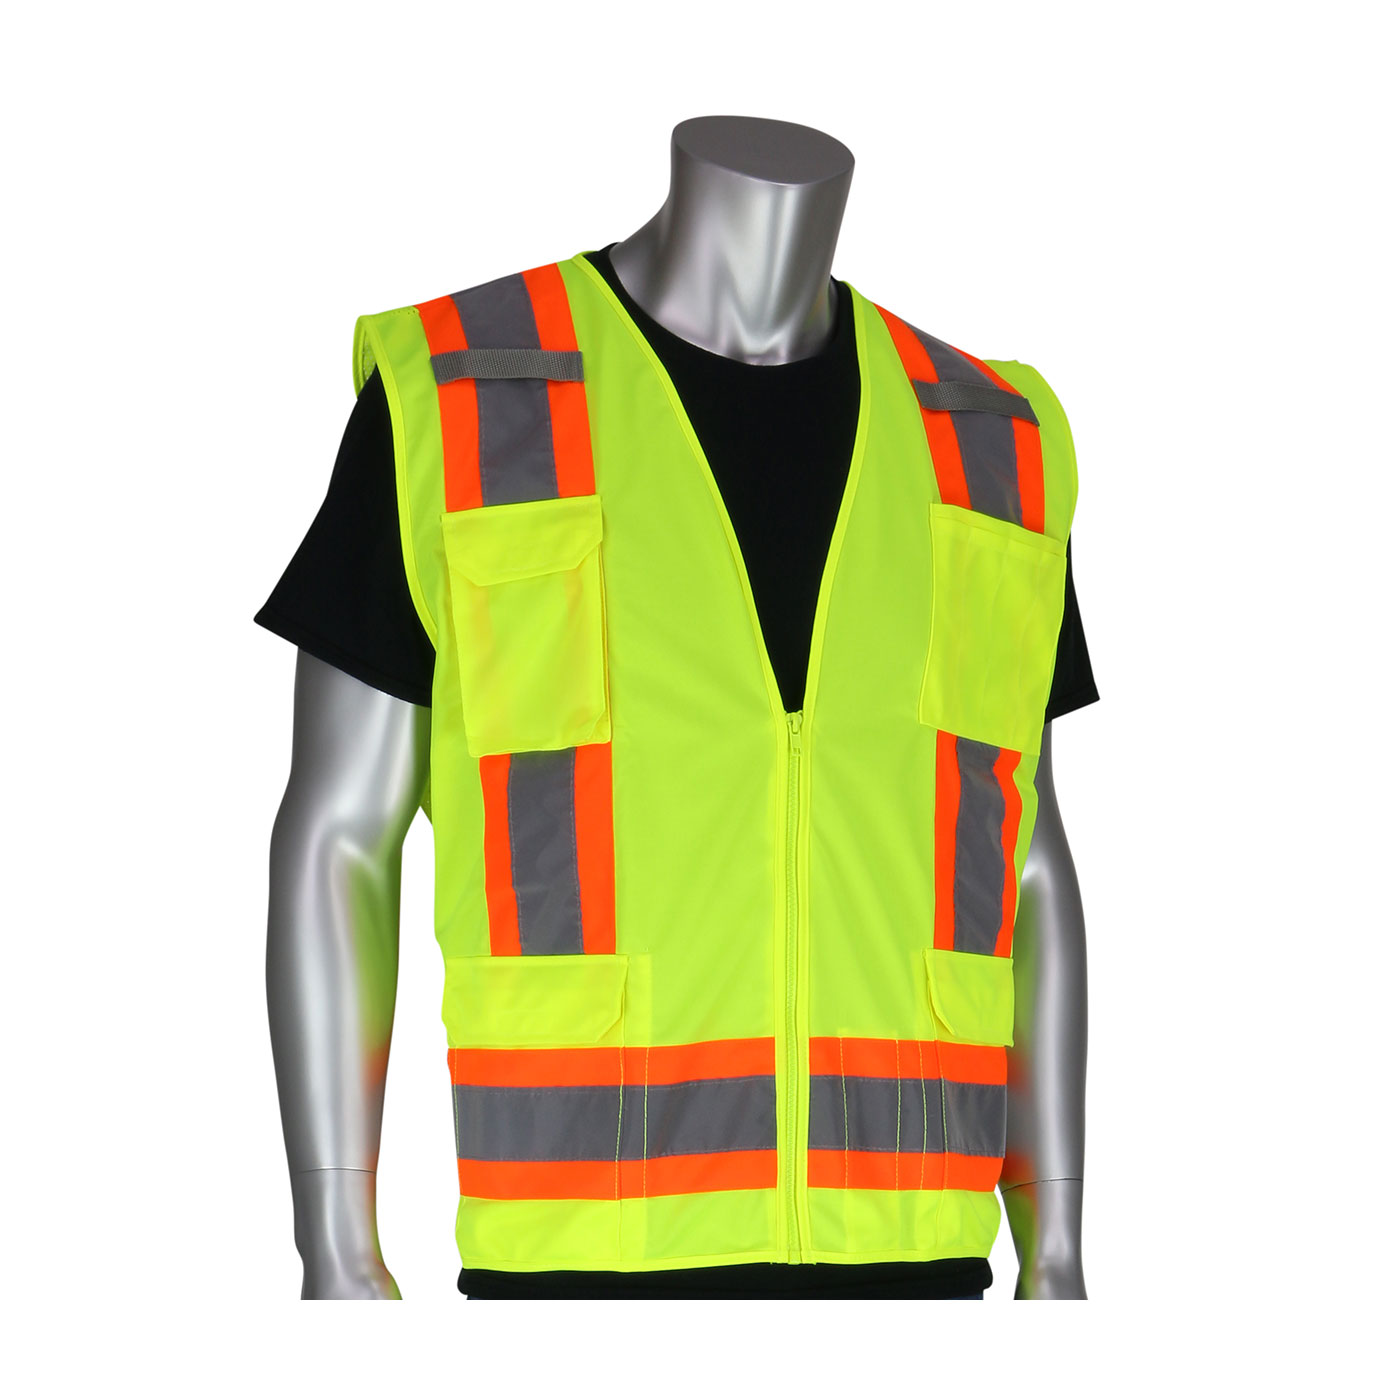 PIP 302-0500-YEL/L ANSI Type R Class 2 Two-Tone Eleven Pocket Yellow Surveyors Vest with Solid Front and Mesh Back - Large PID-302 0500YEL L